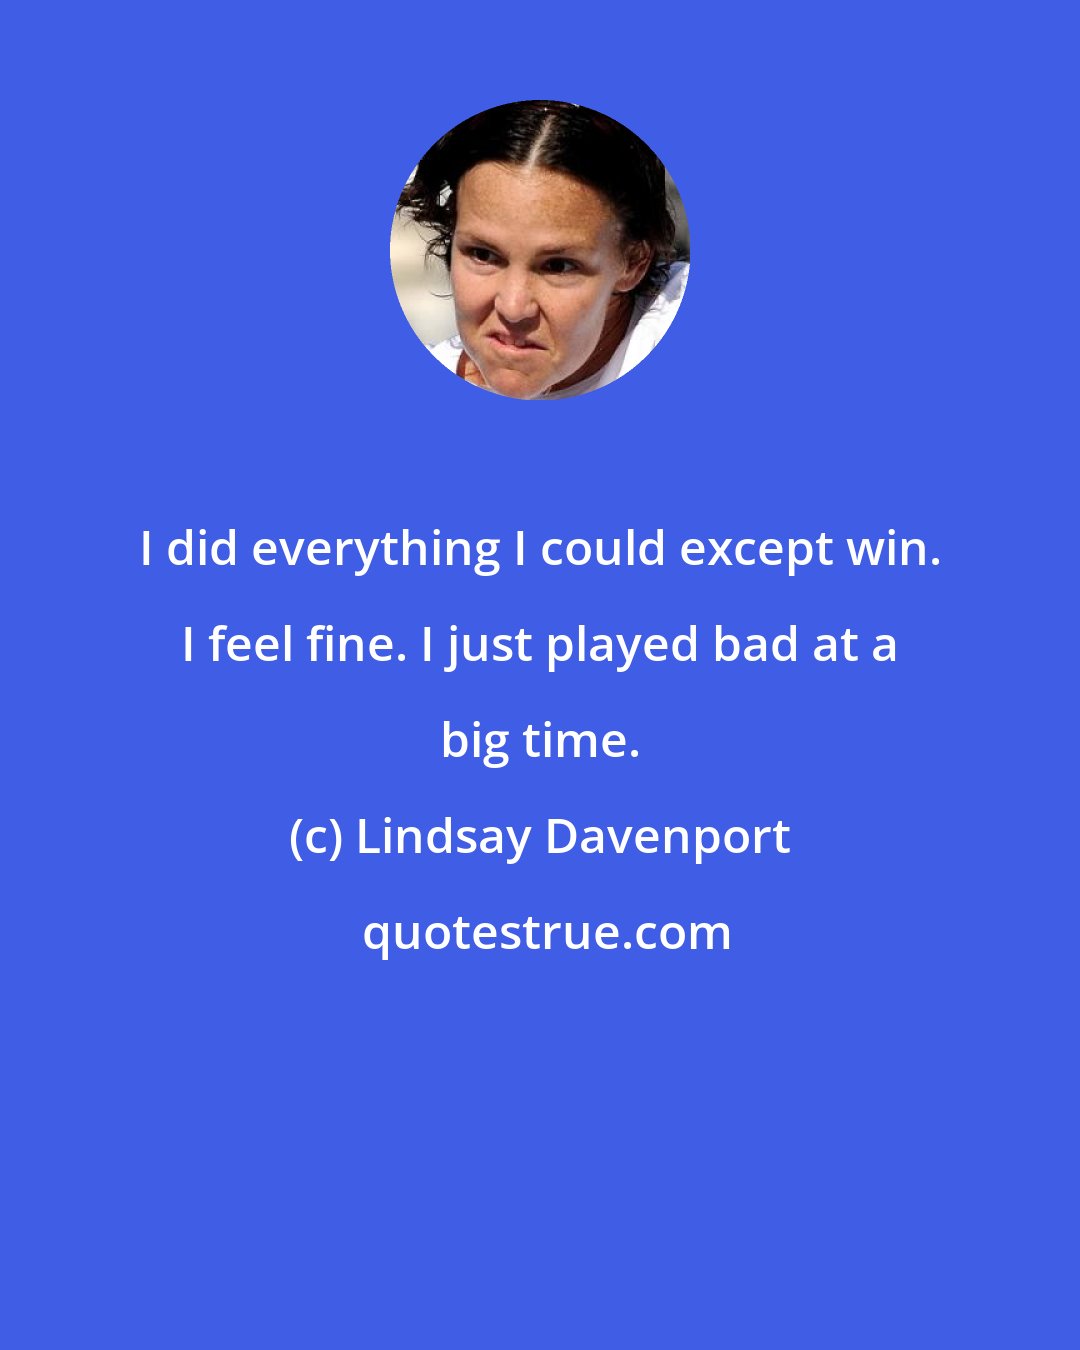 Lindsay Davenport: I did everything I could except win. I feel fine. I just played bad at a big time.